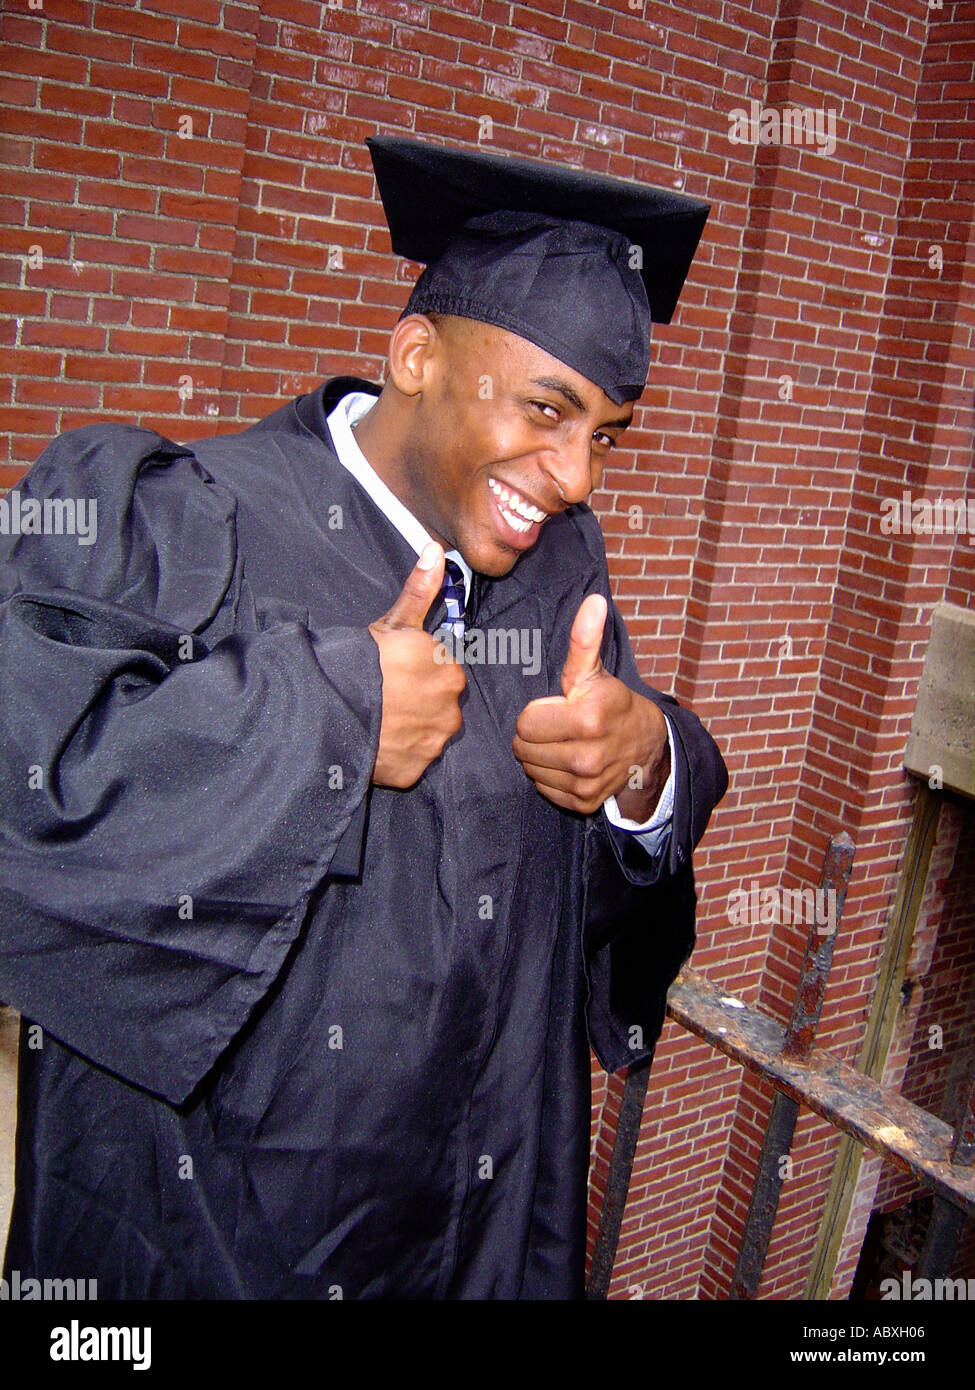 Portrait of a Man Wearing A Graduation Cap And Gown He is Excited and is  Making the Thumbs Up Gesture Stock Photo - Alamy